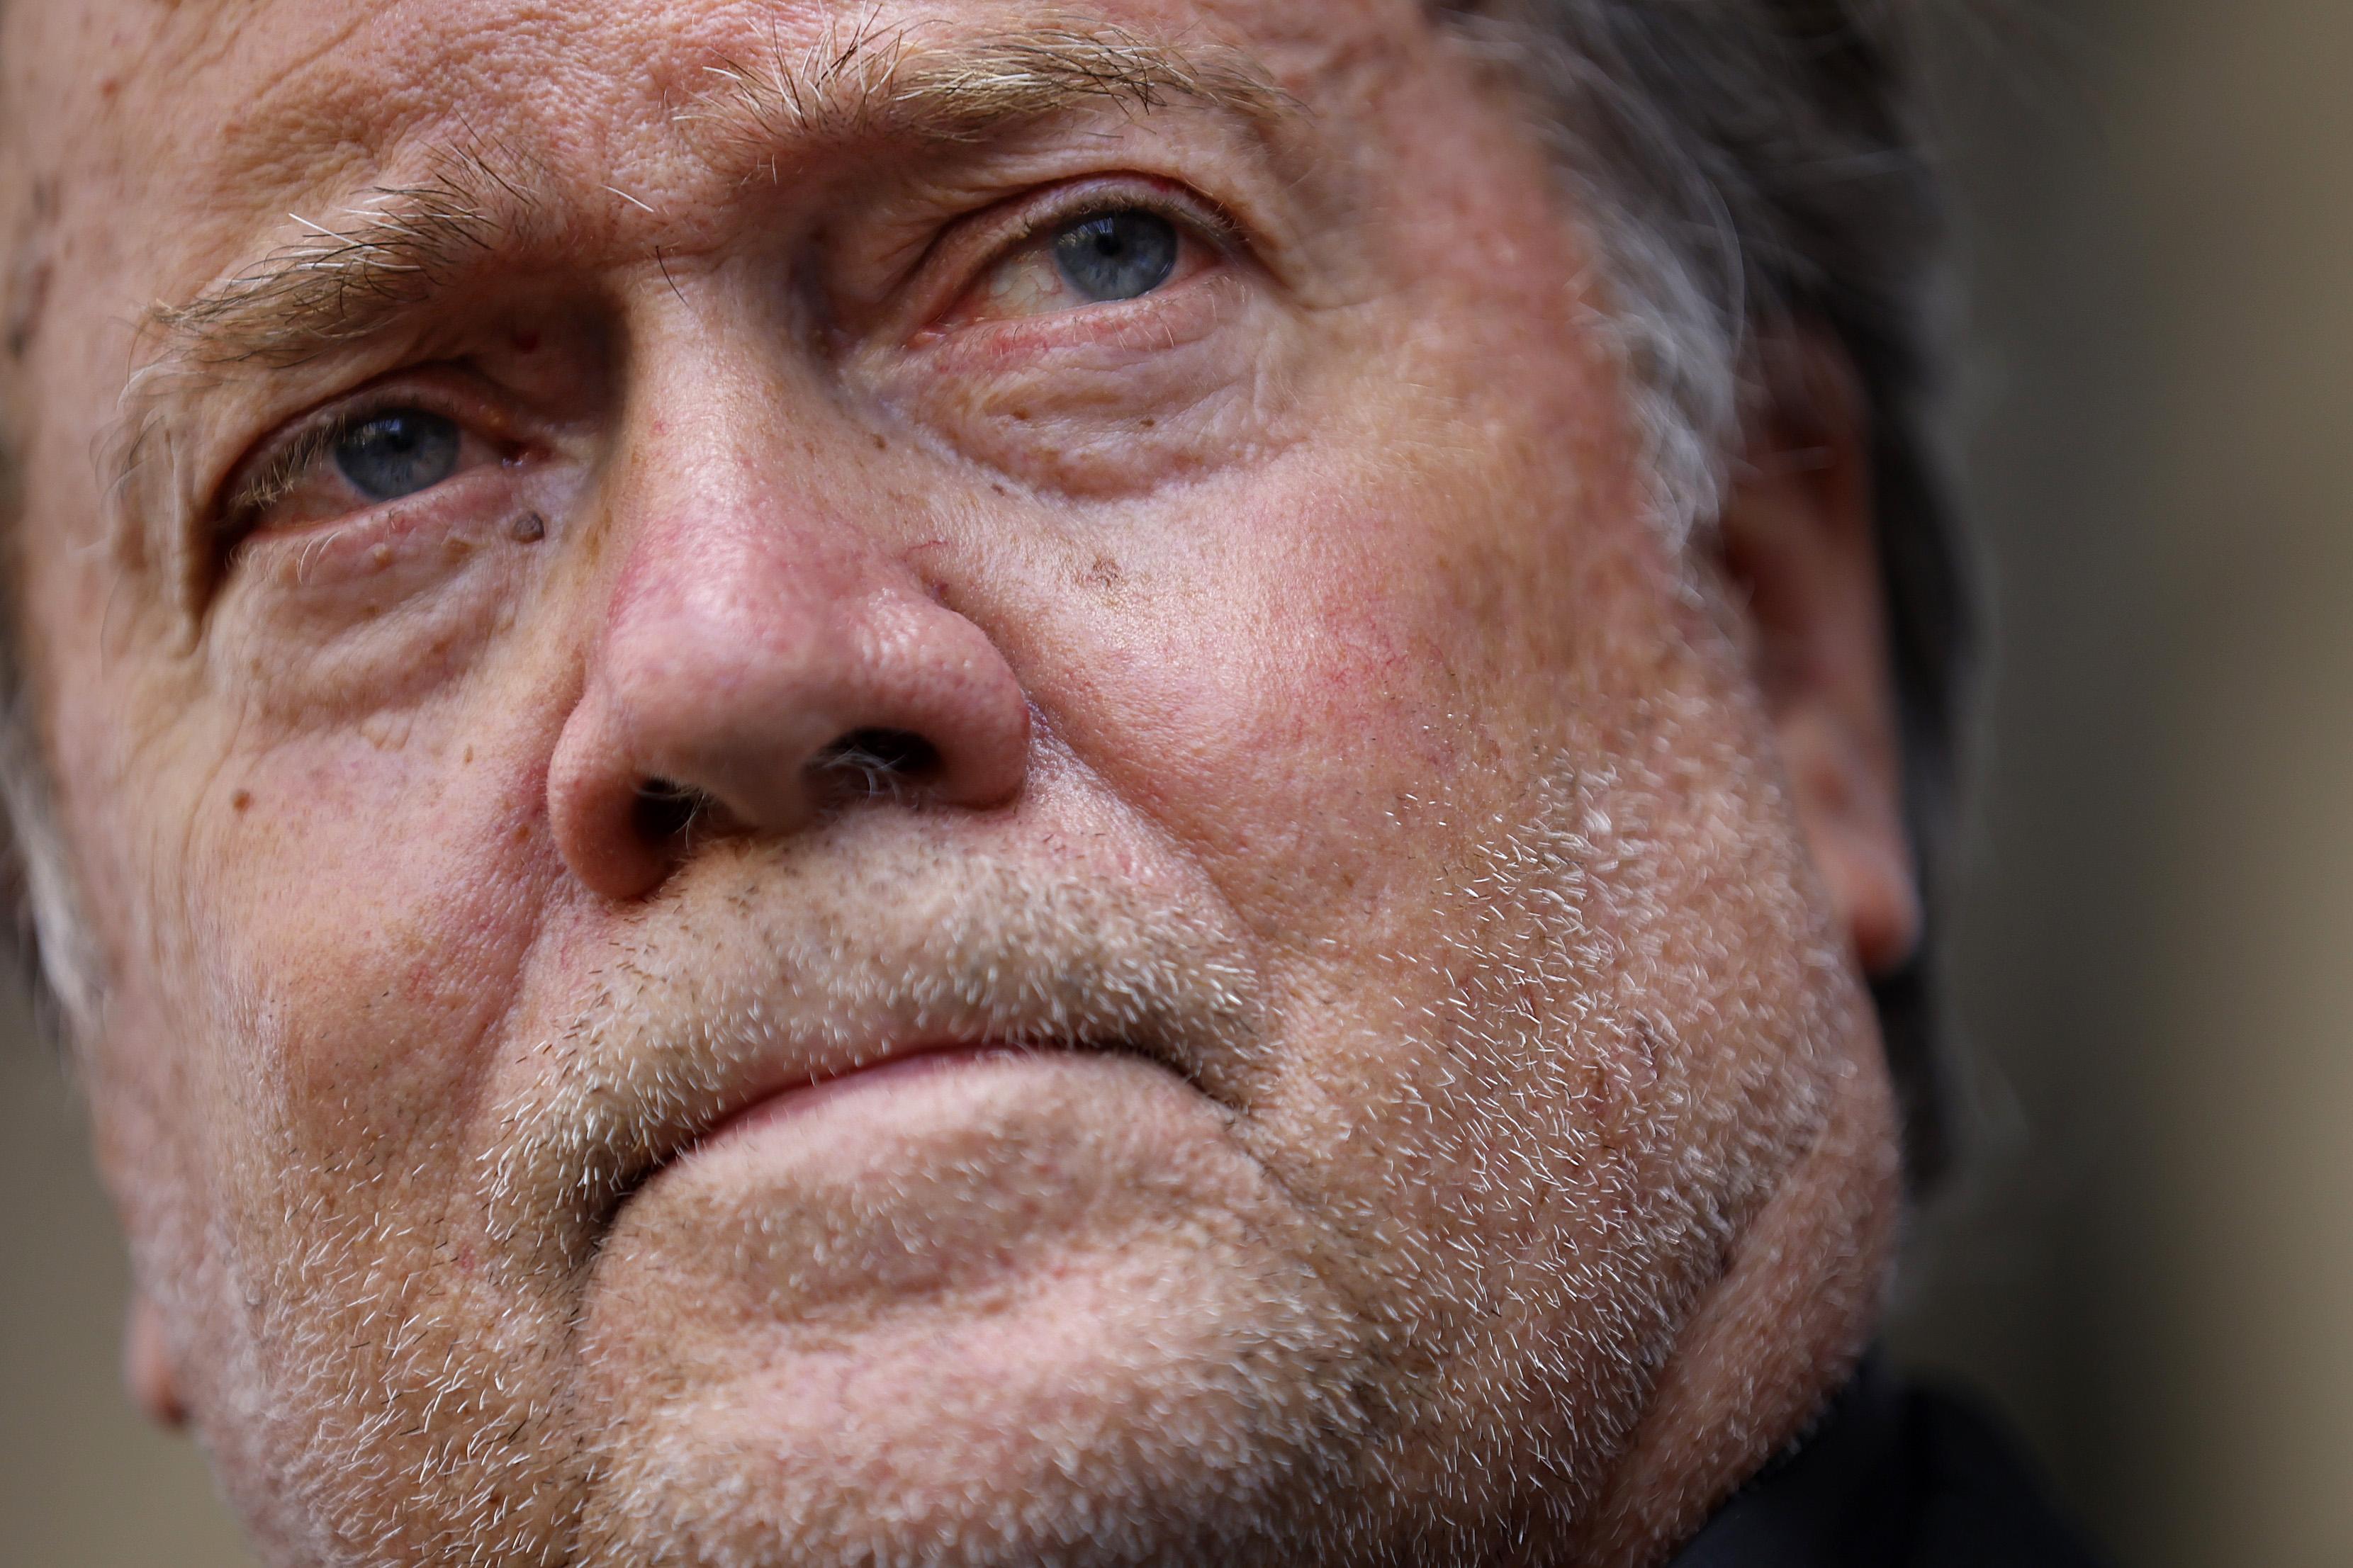 A close-up of Bannon's stubbly, pock-marked face looking extremely sad.